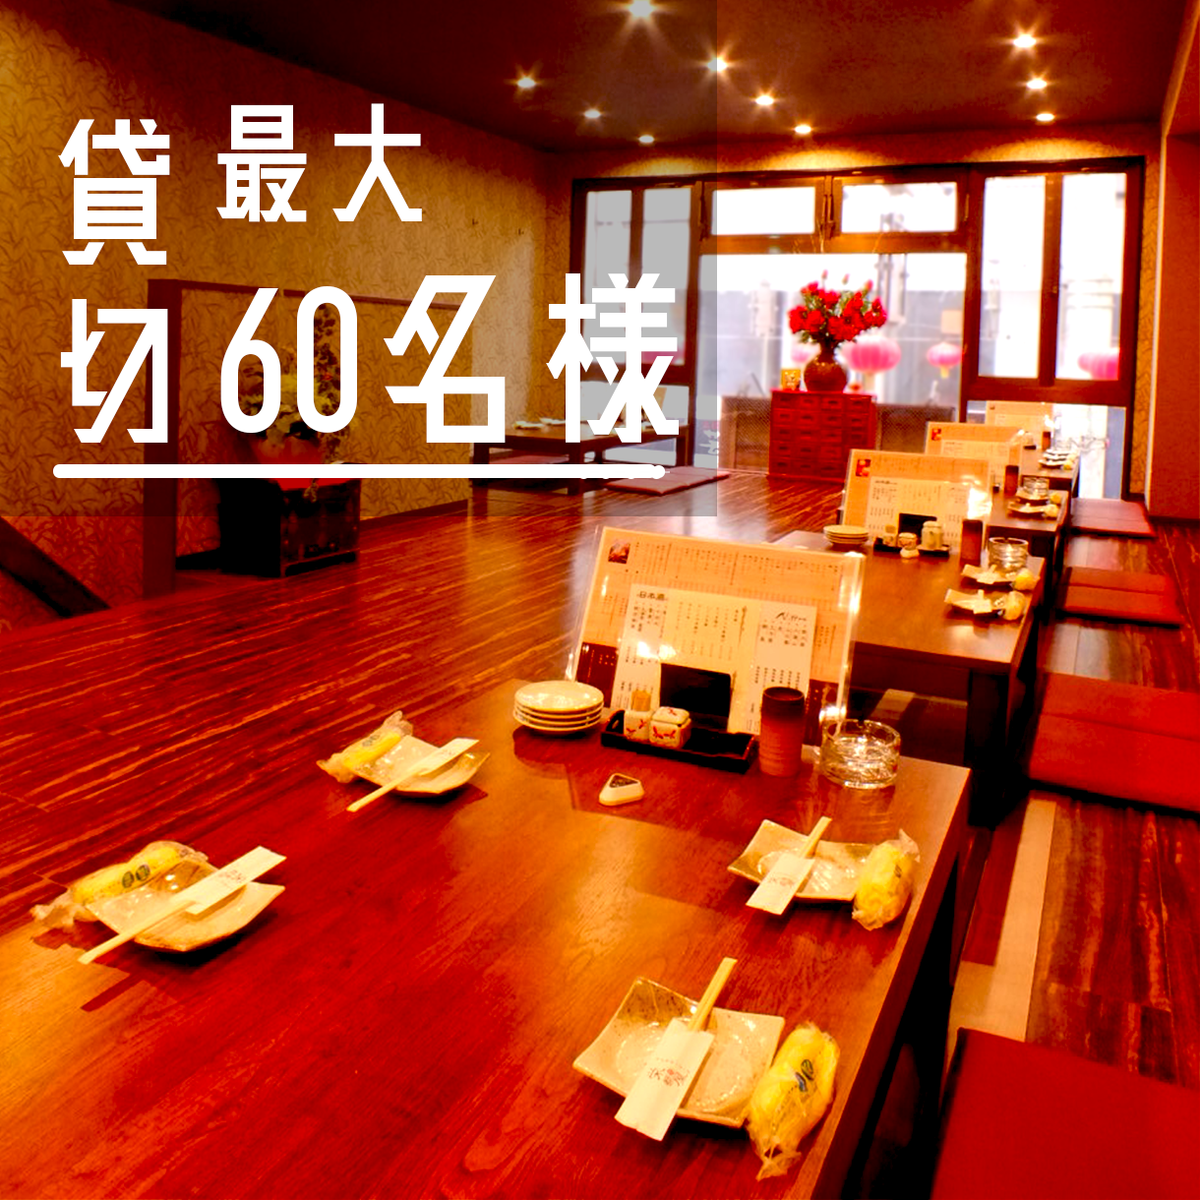 The 2nd floor can be reserved for up to 60 people ◎ Can also be used for large parties.